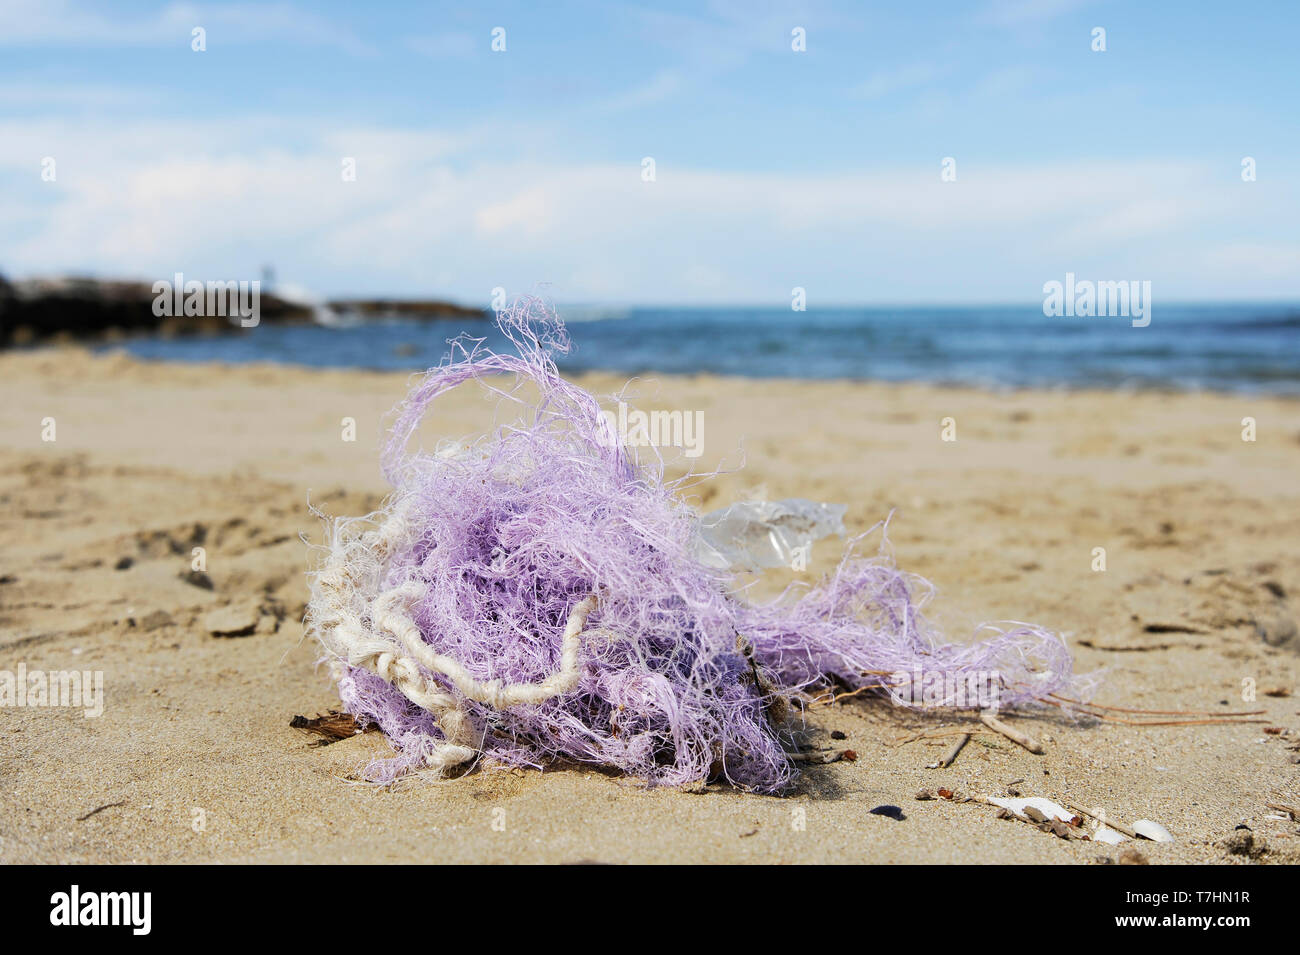 Fishing nylon net on the sand. Garbage on the beach. Dirty sea